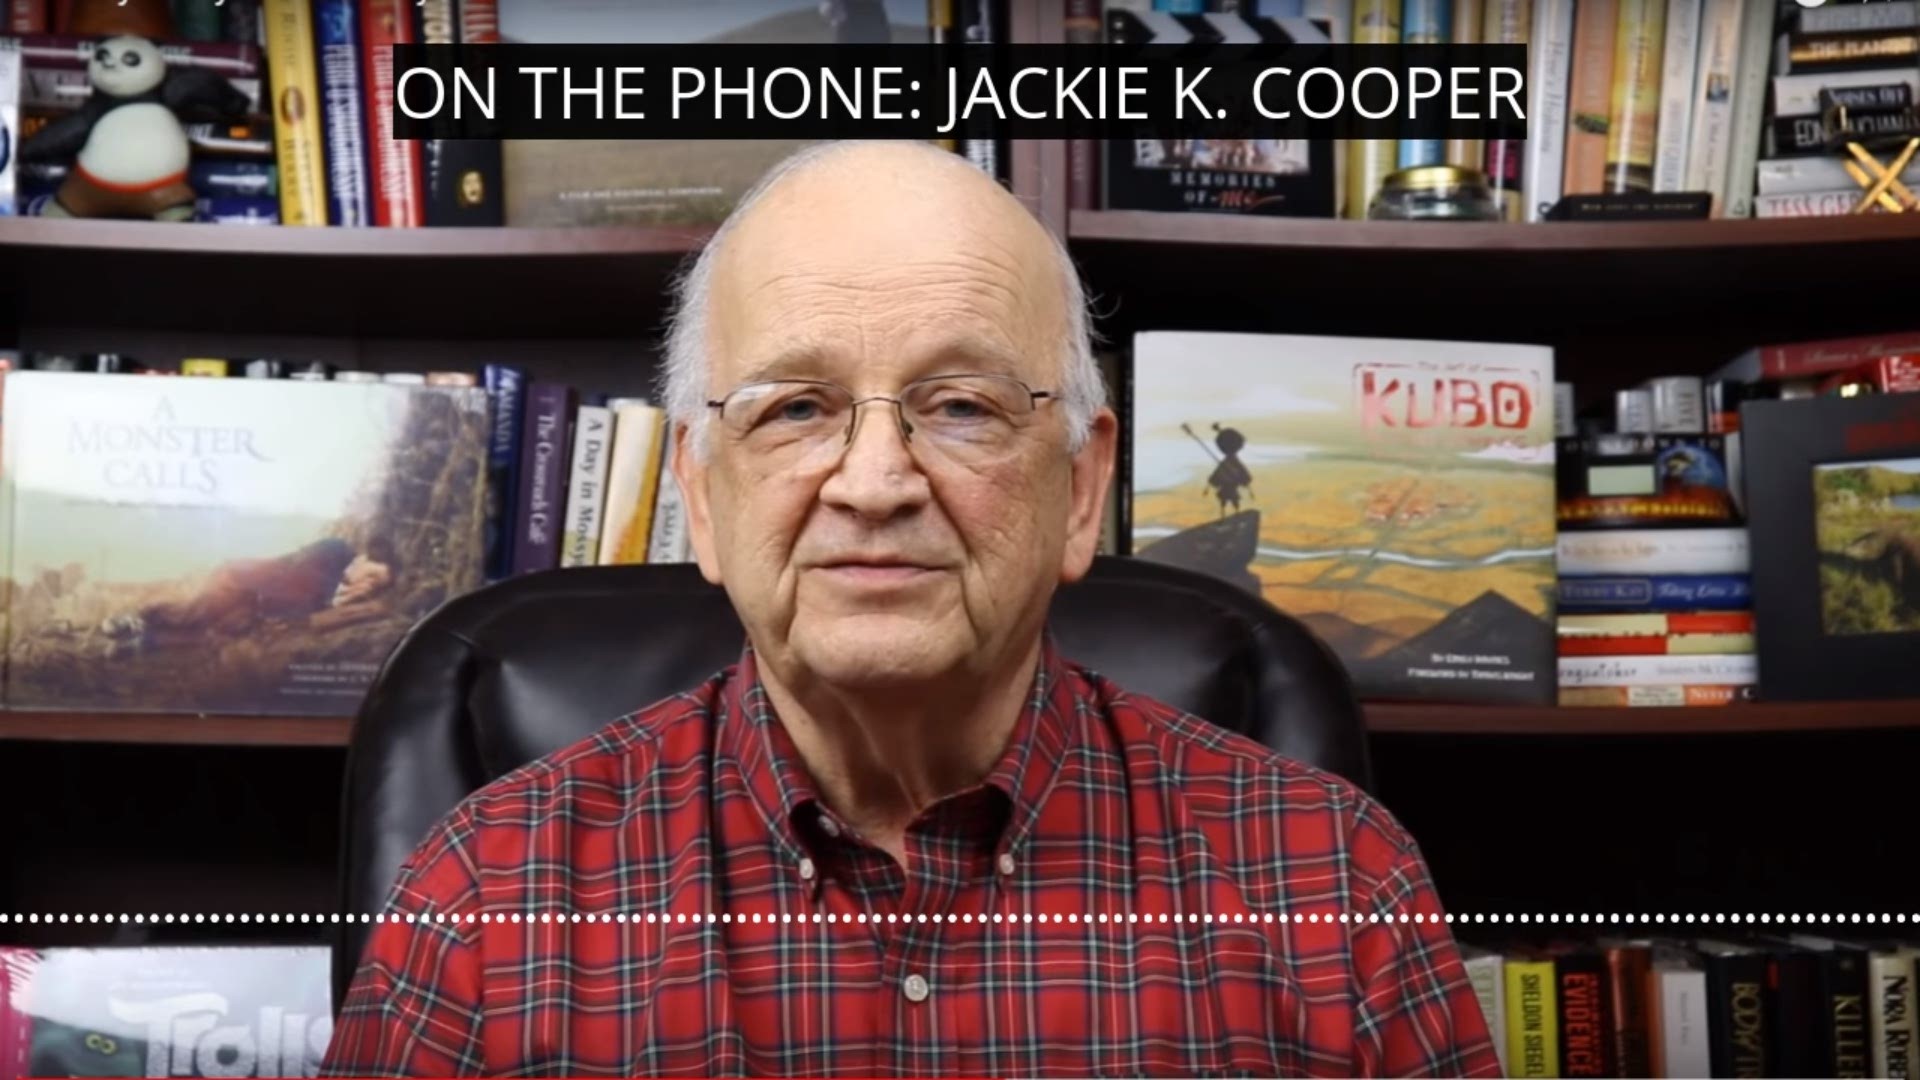 Cooper, a long-time movie, book and tv show critic, went viral after one of his supporters posted about him on Reddit. His subscriber count on YouTube grew from 136 to over 42,000 in just a few days.